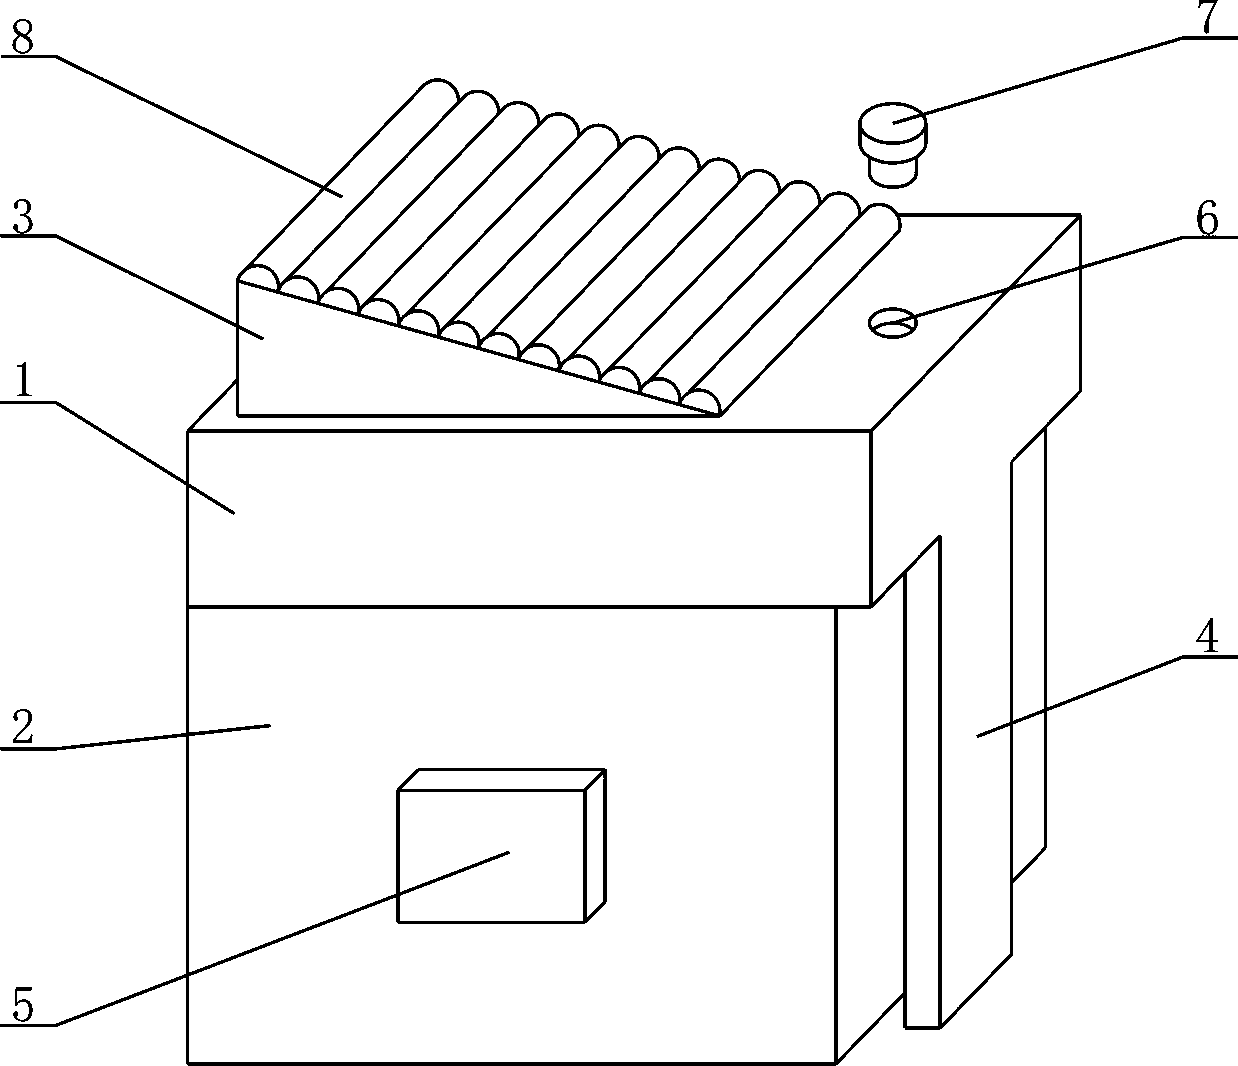 Water-adding ink-grinding device for teaching